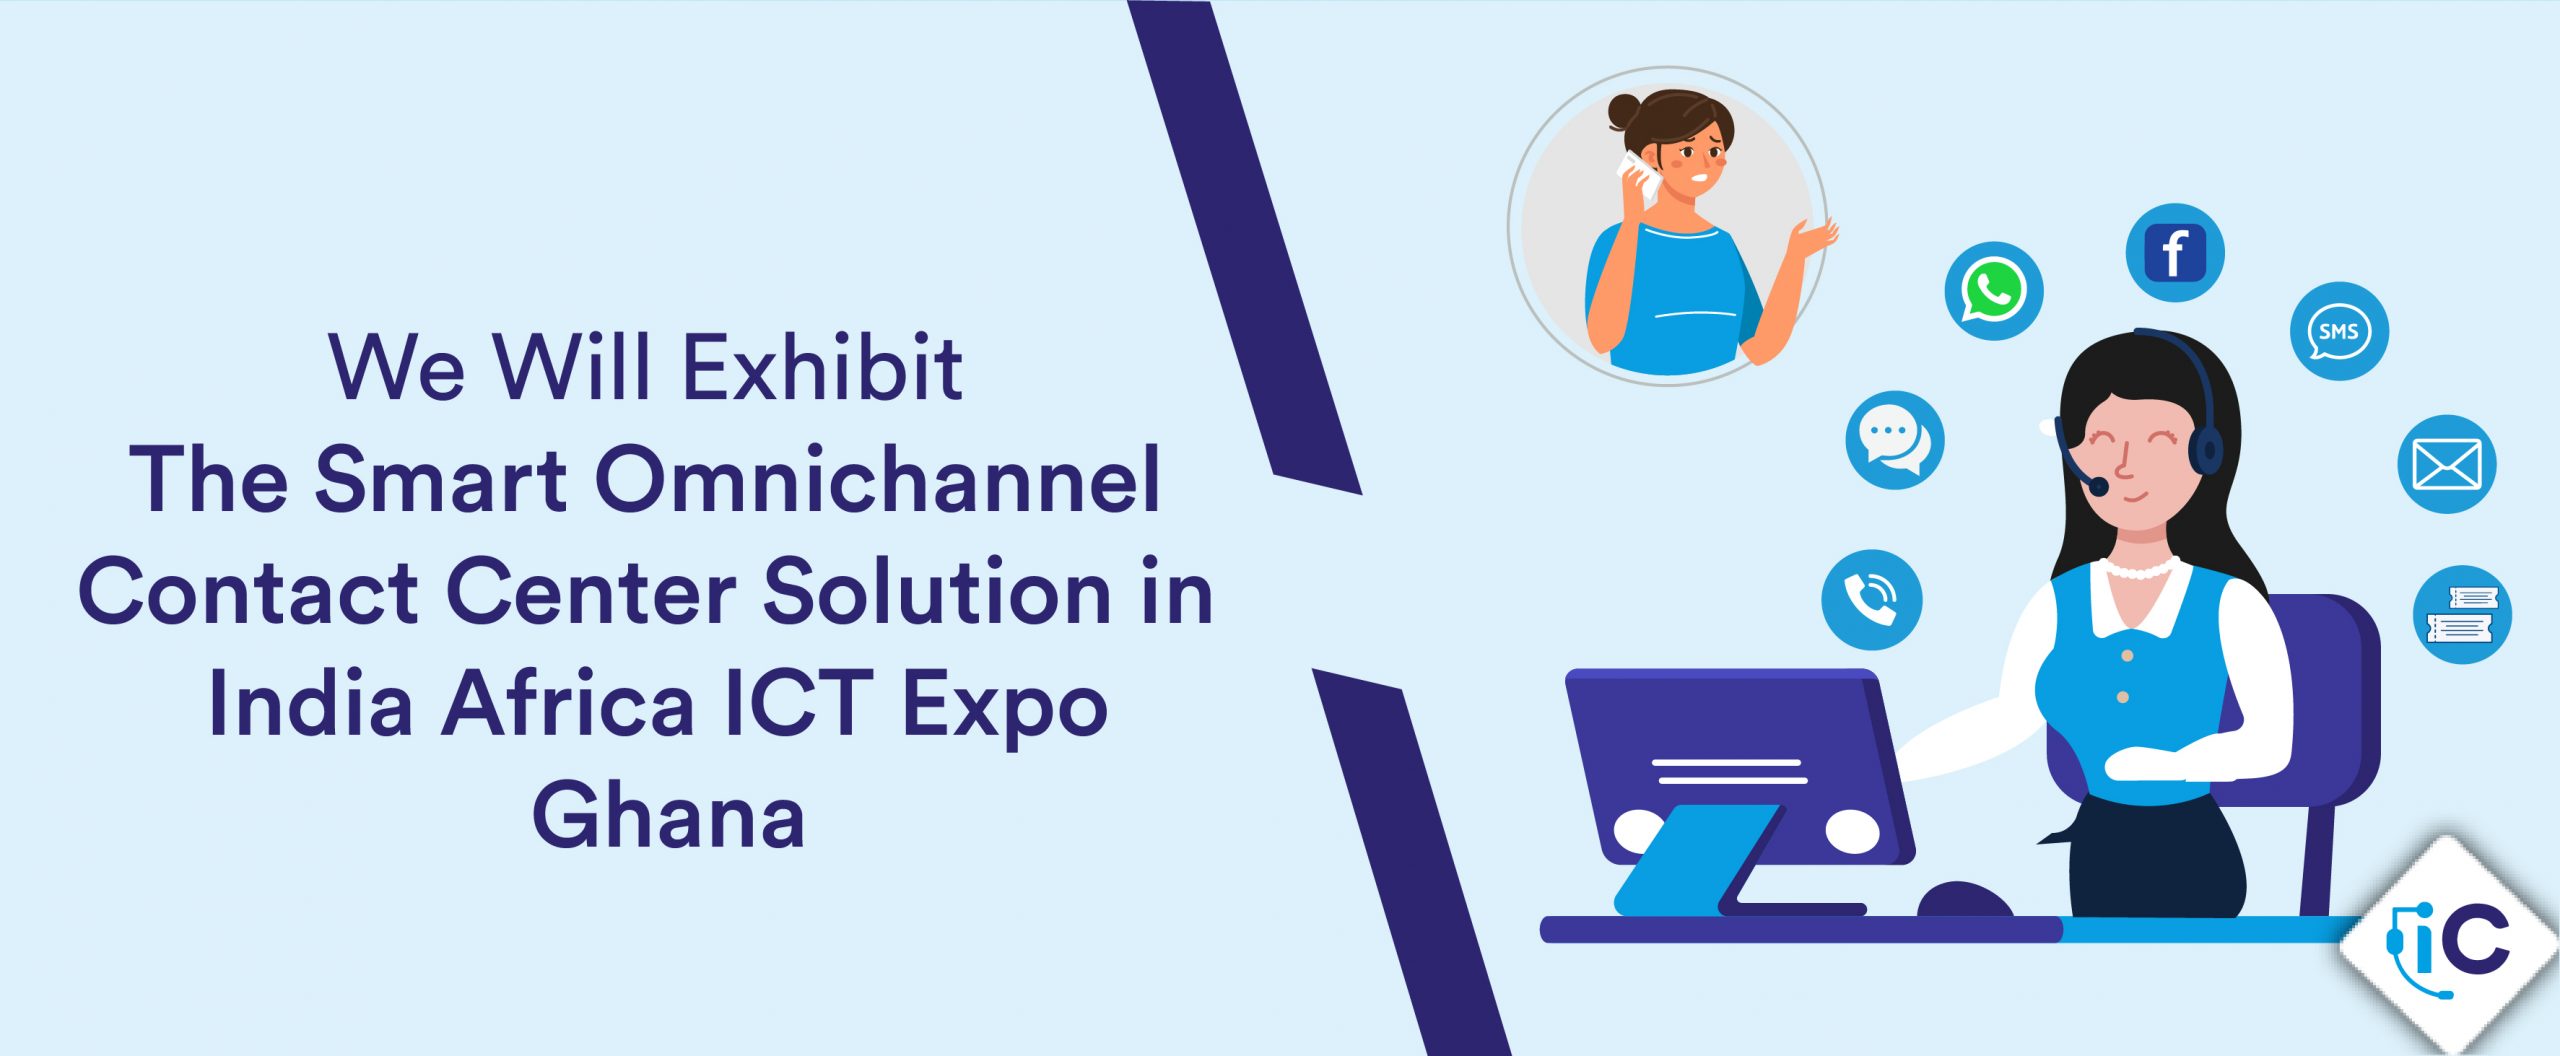 We Will Exhibit the Smart Omnichannel Contact Center Solution at India Africa ICT Expo Ghana